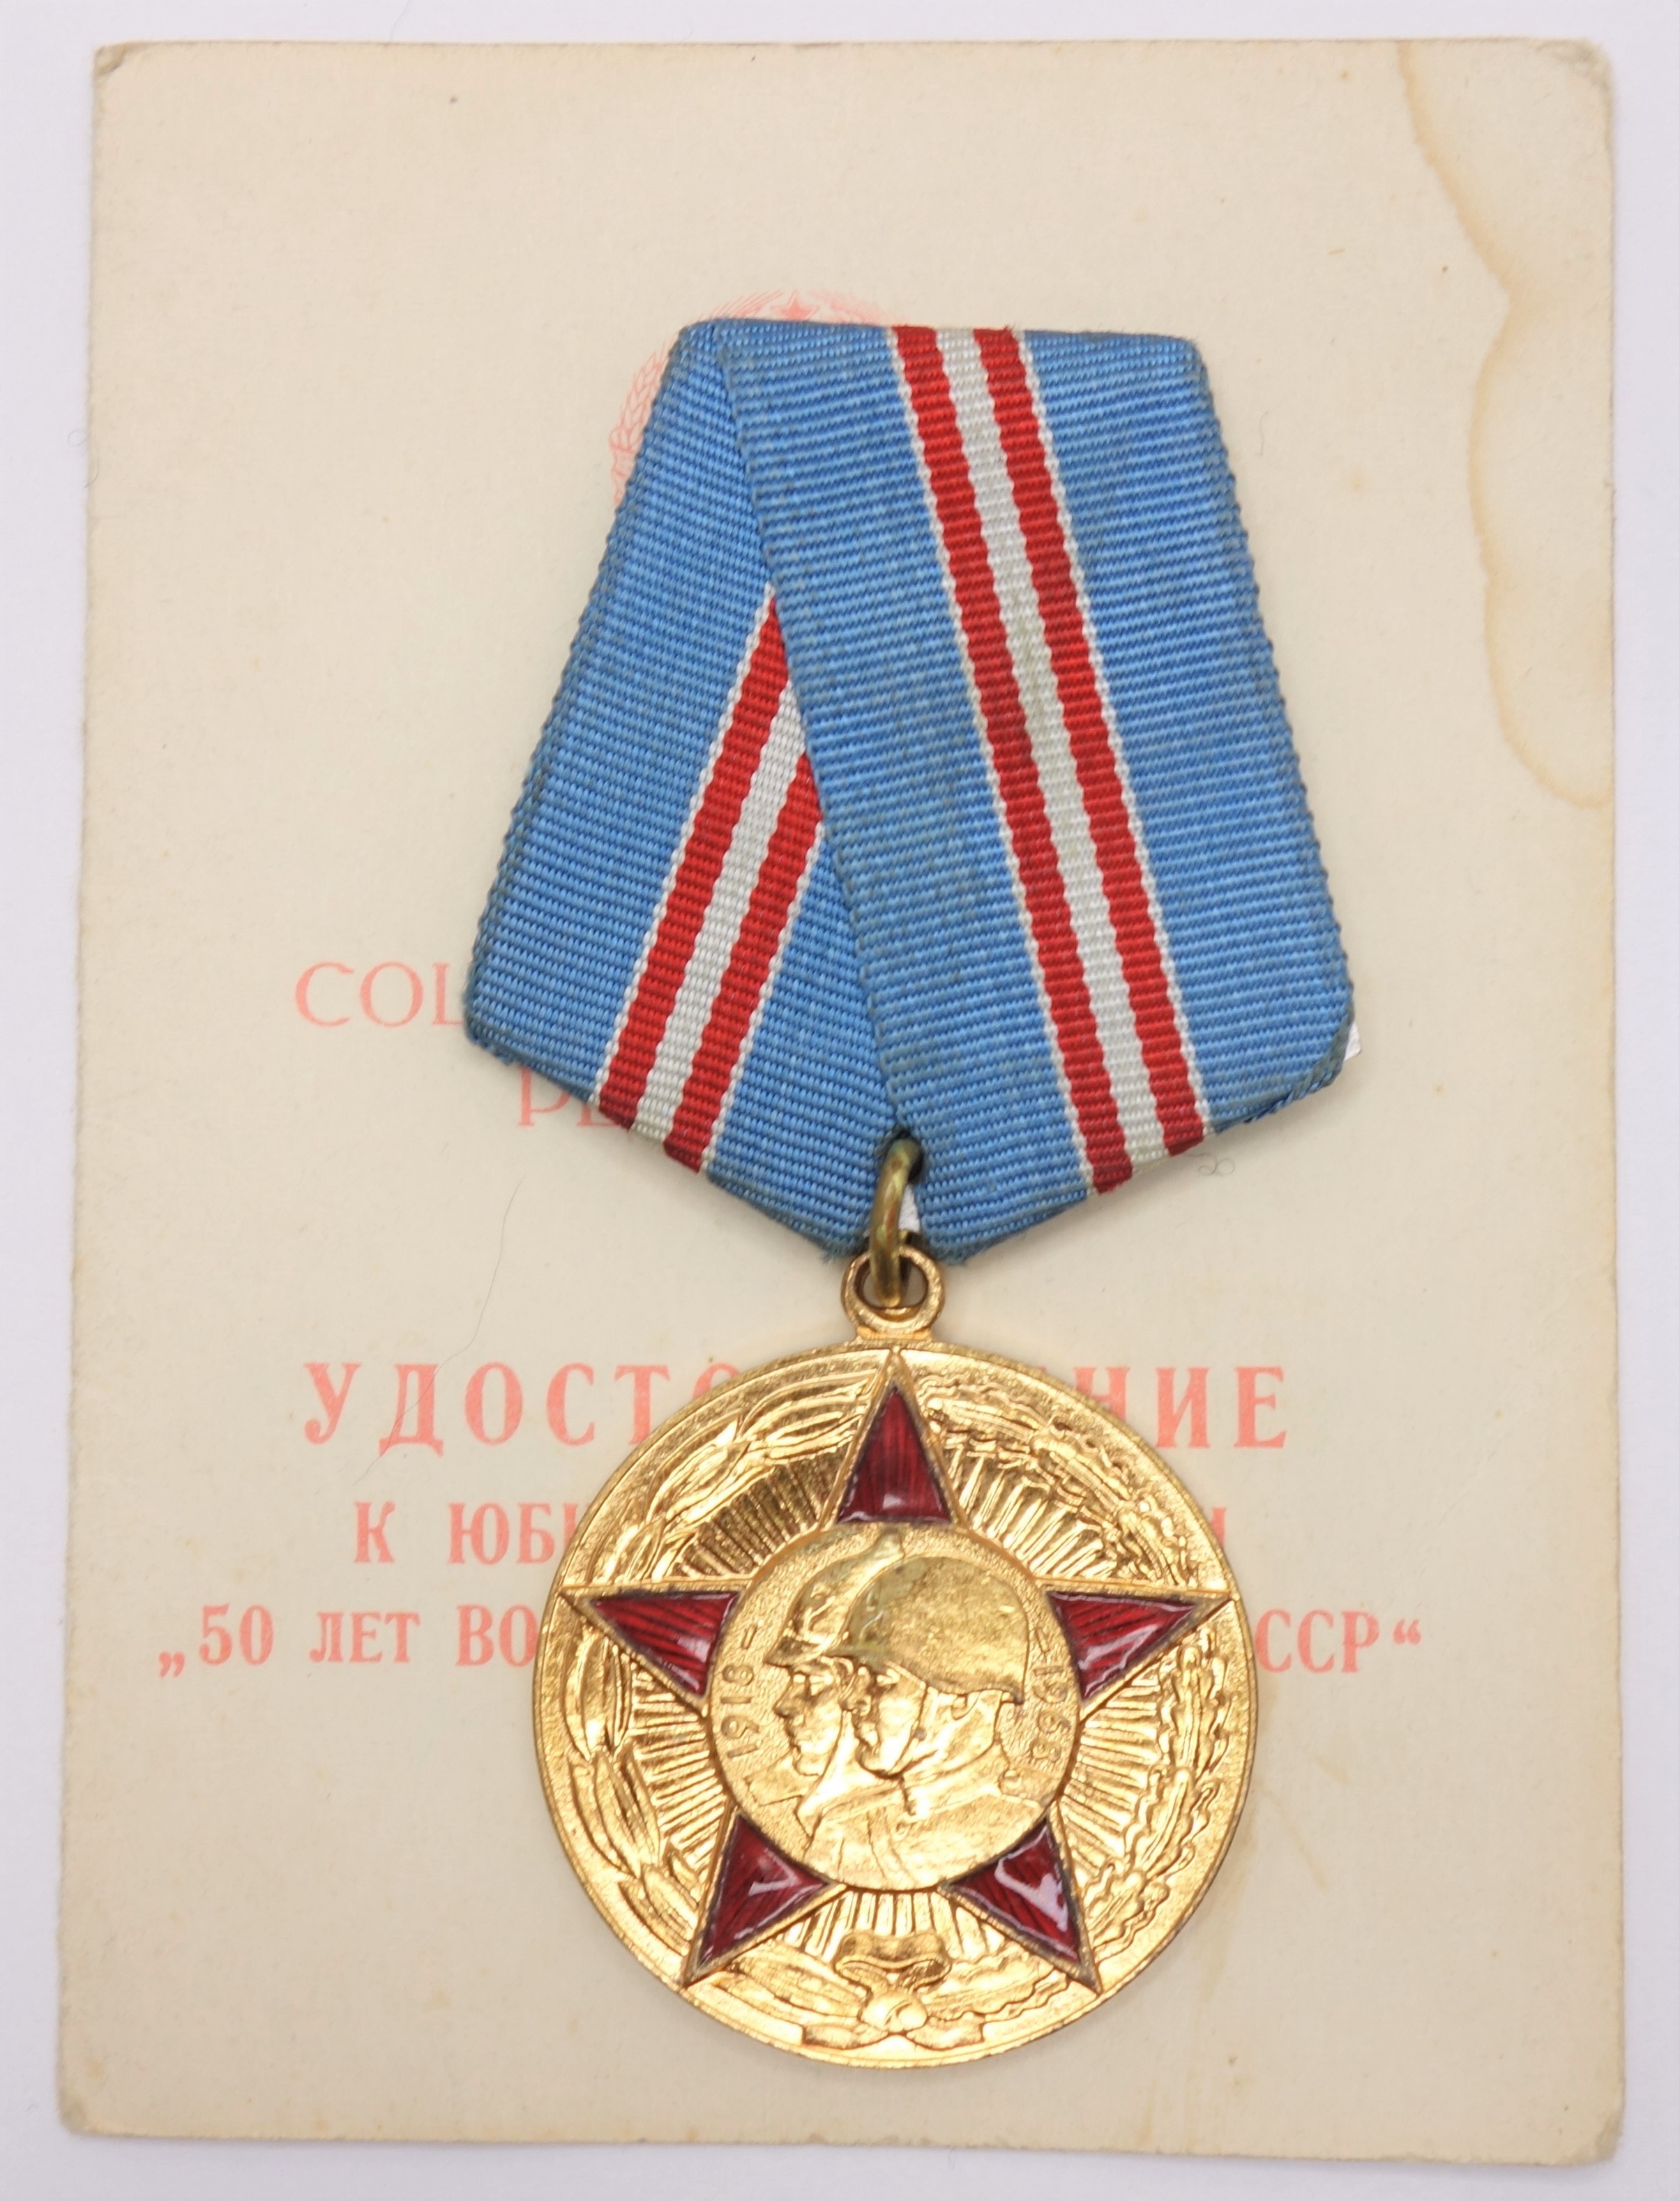 60 Years of the Armed Forces of the USSR Jubilee Medal with Document